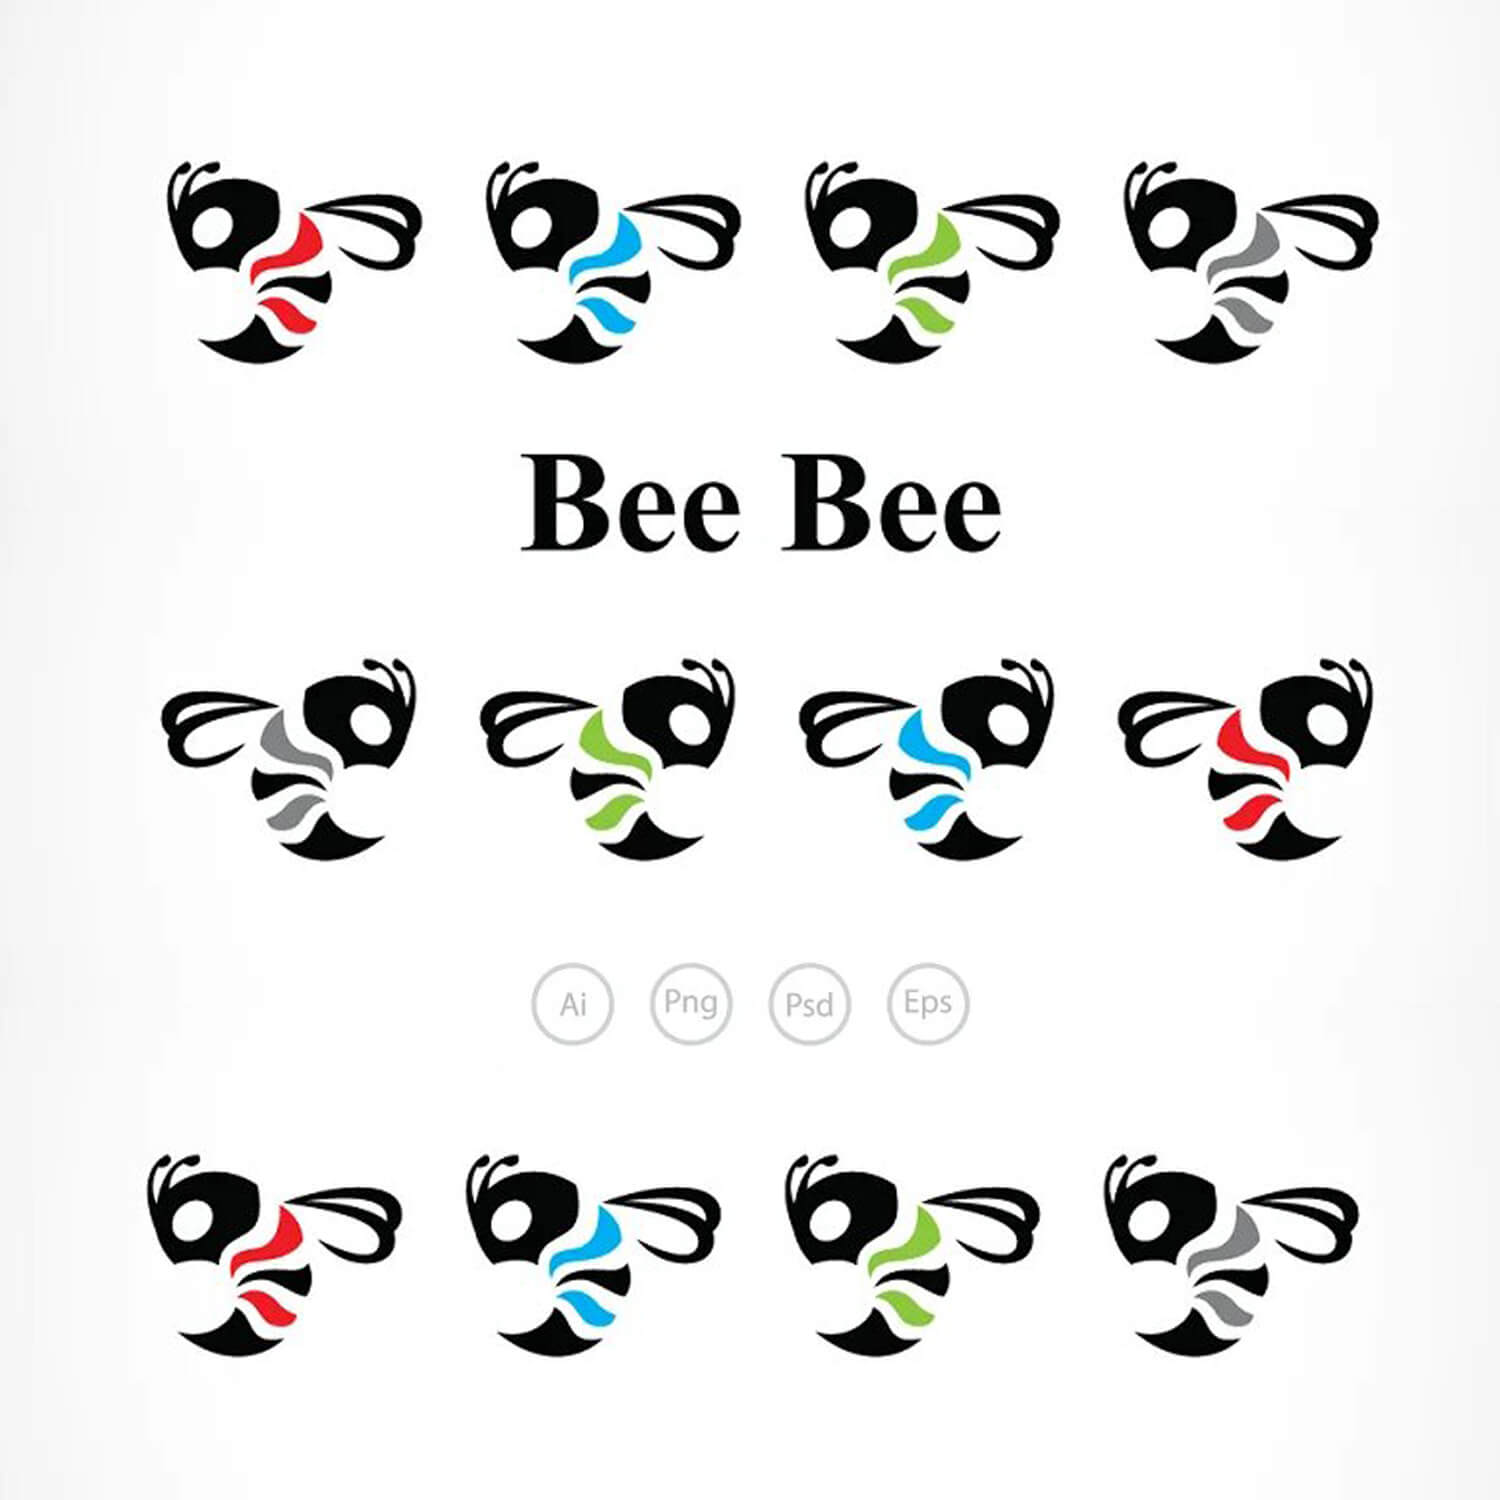 Color variation of the logos of bees, the location of the bees in different directions.